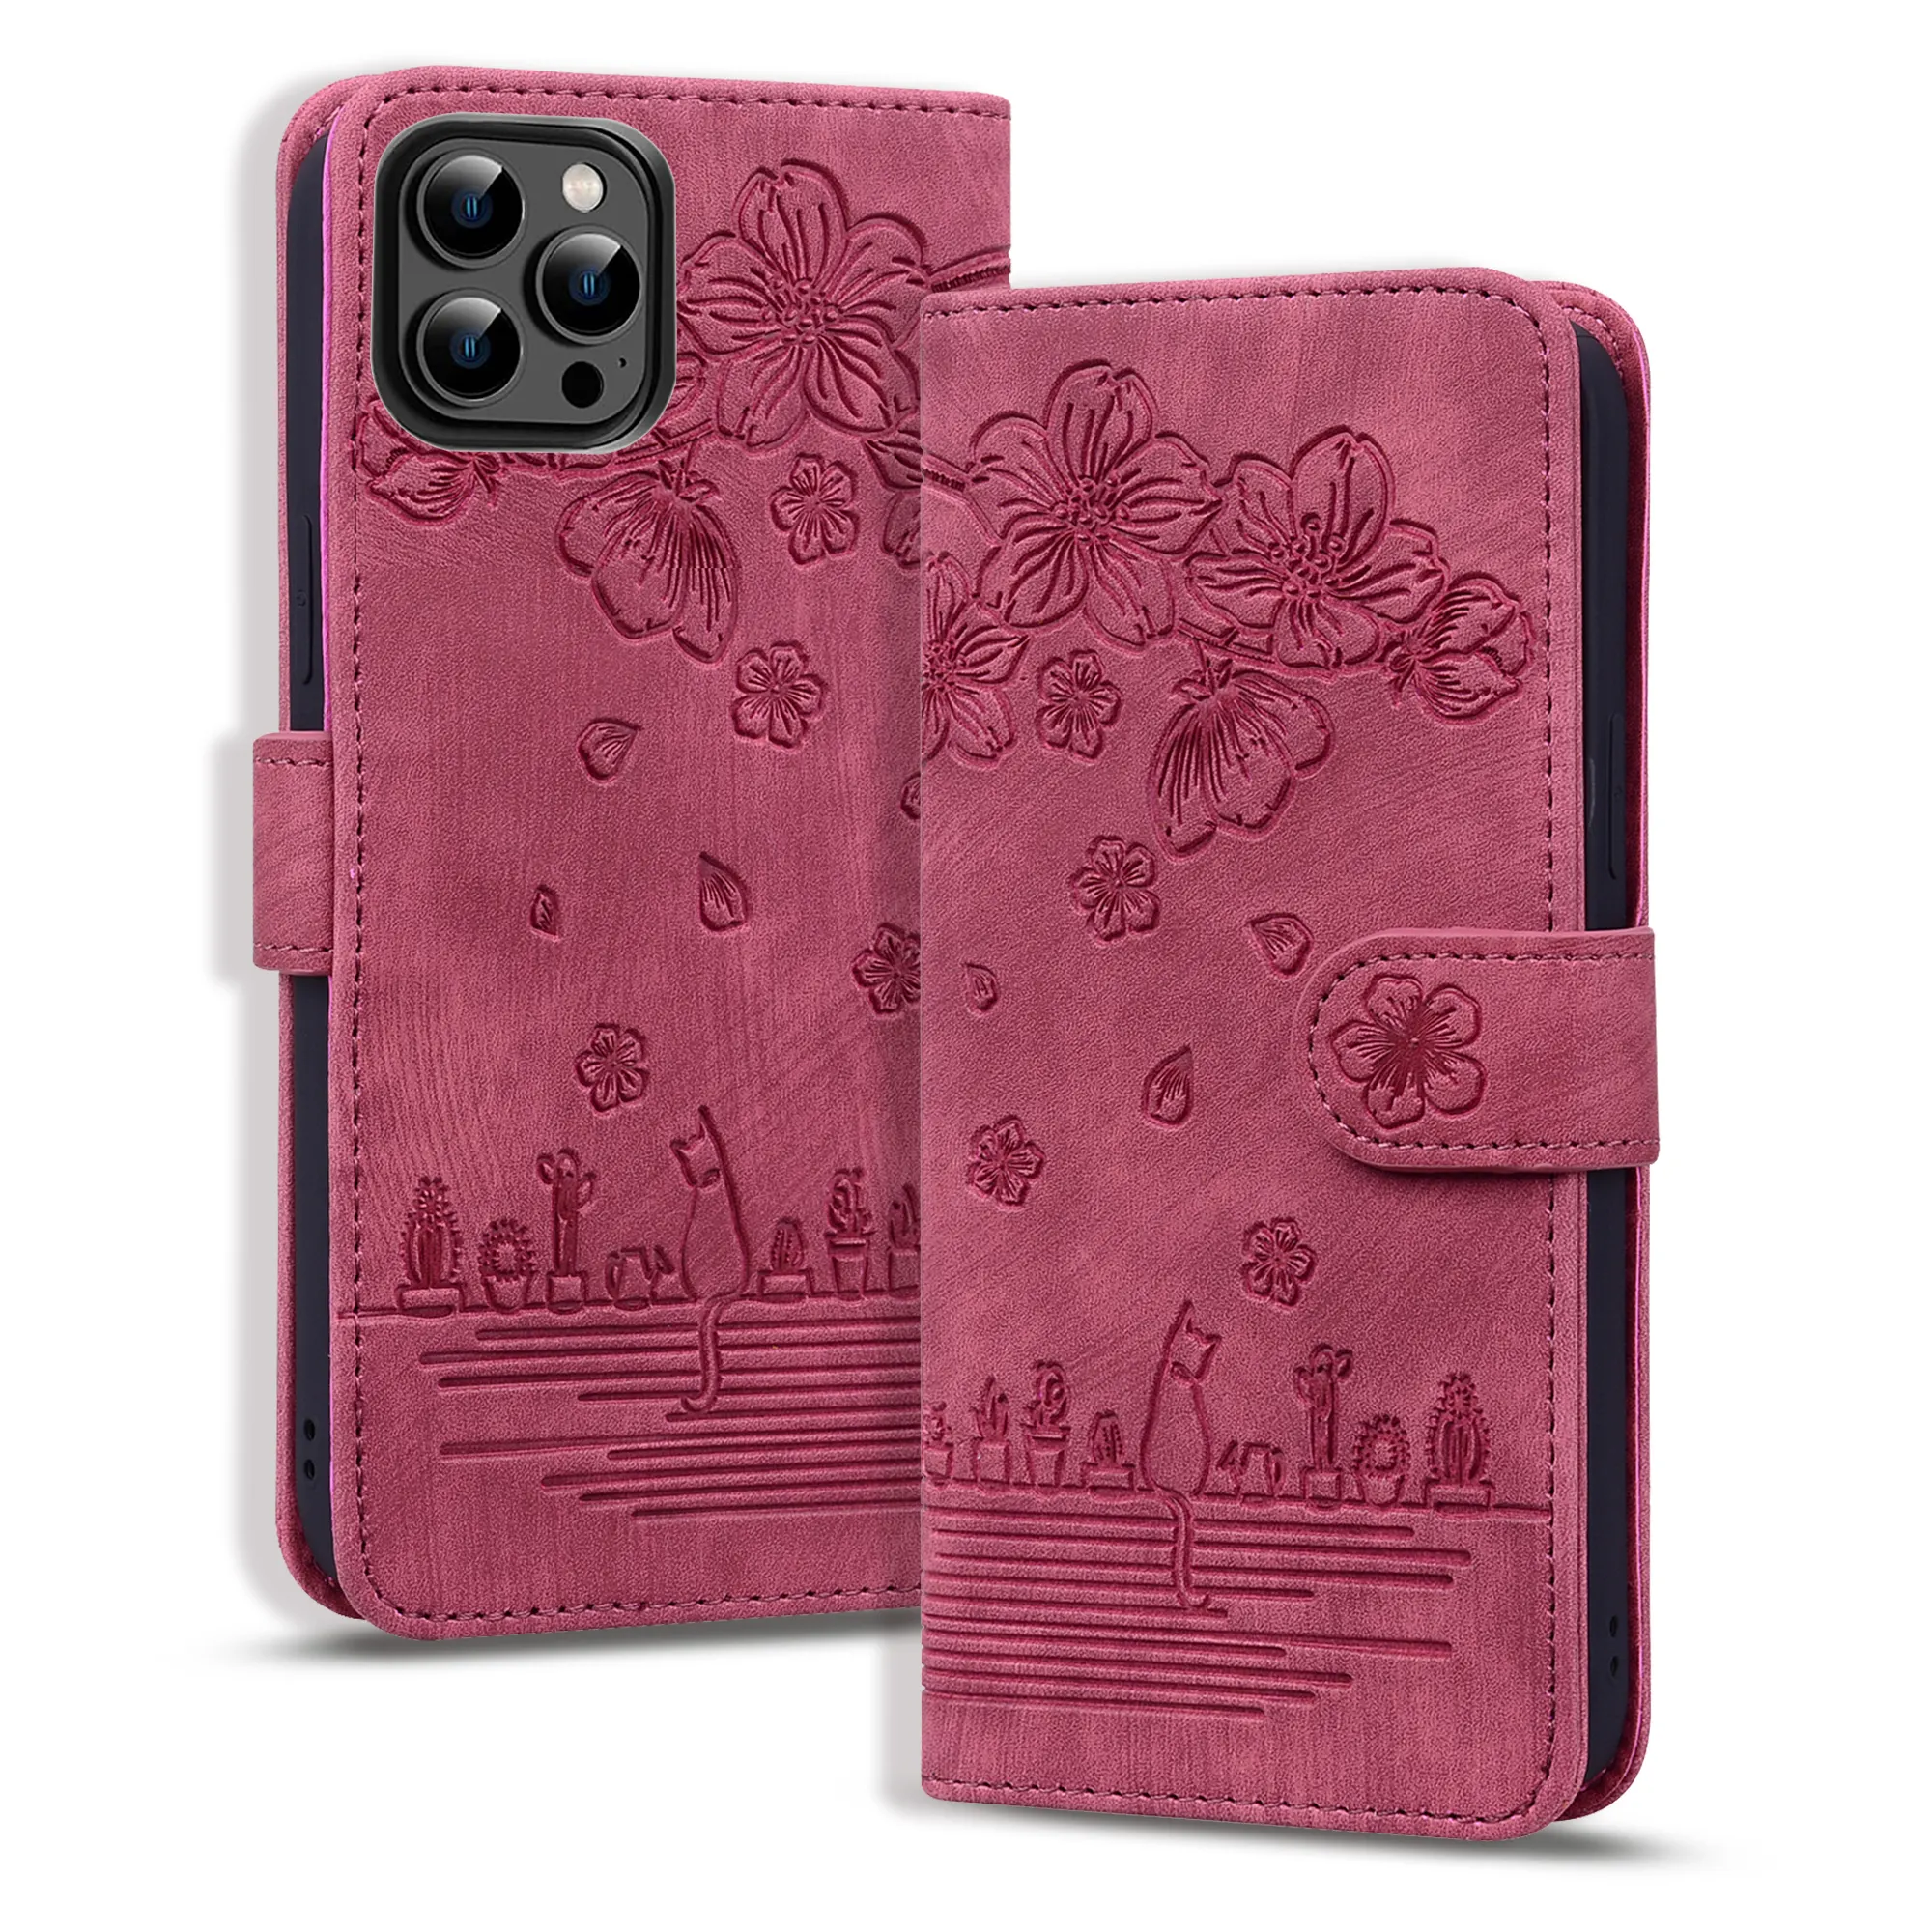 PU Leather Embossed Wallet Card Slot Phone Case For Iphone 14 13 12 11 Mini Pro Max Retro Sakura Flower Leather Flip Book Cover